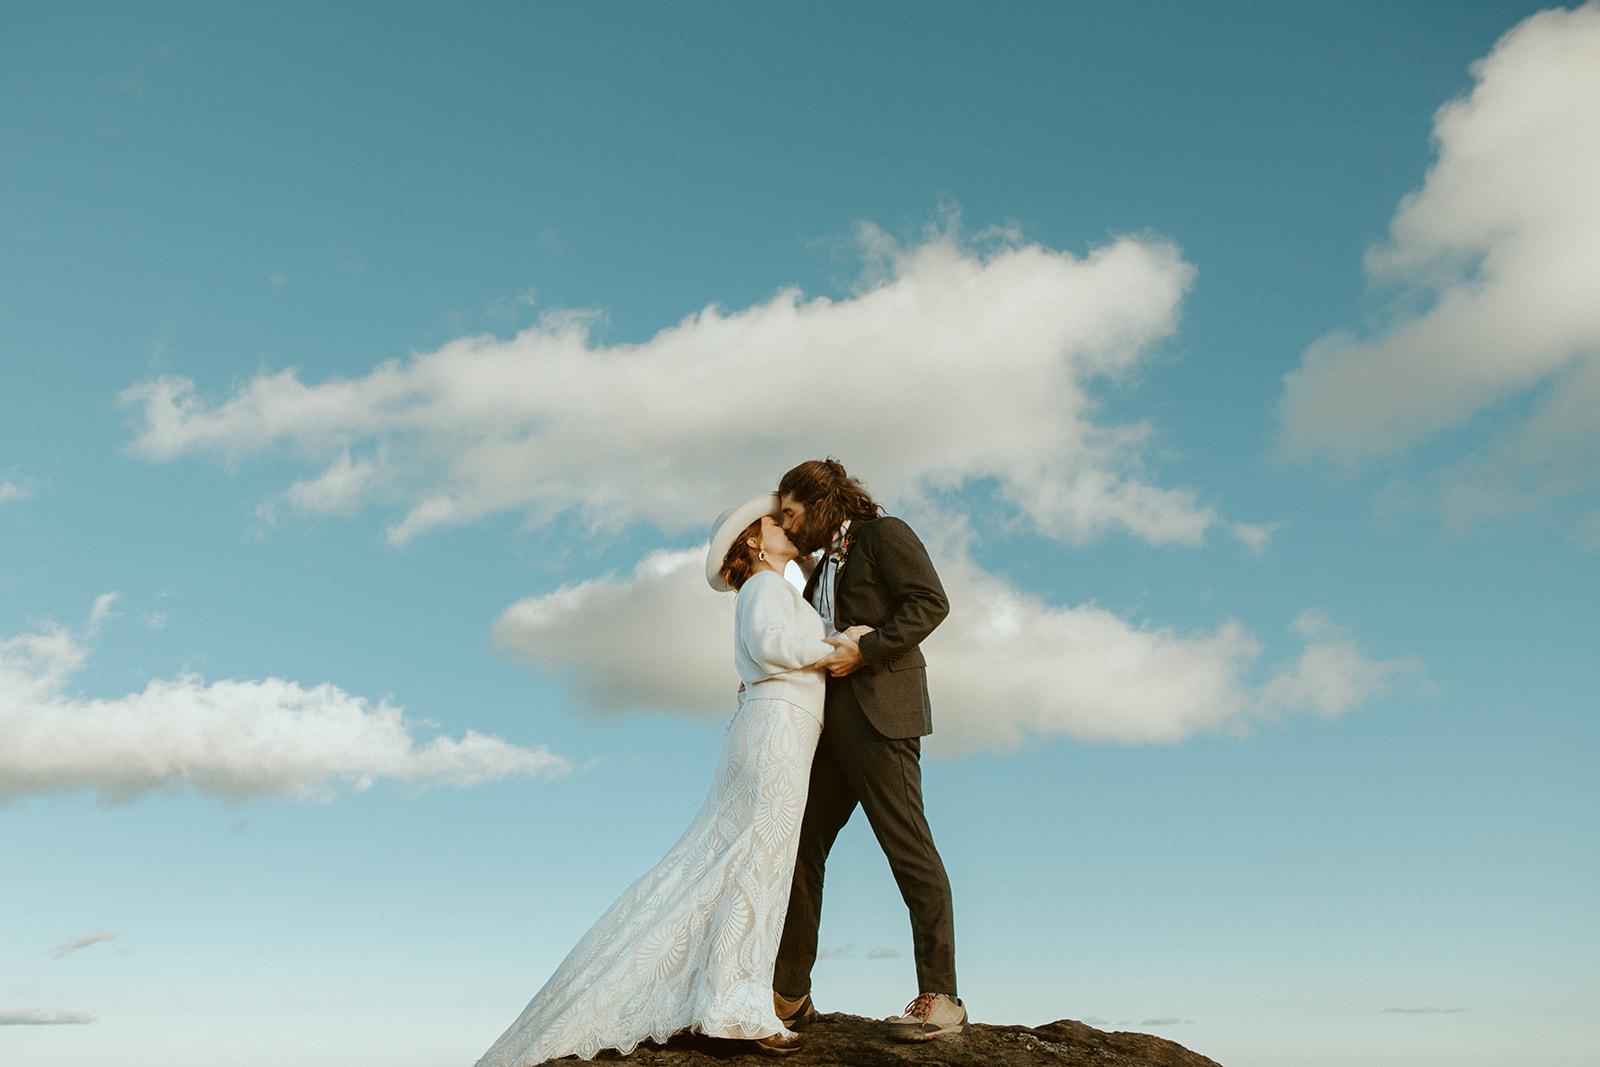 A bride and groom embrace and kiss on top of a mountain during their winter elopement.